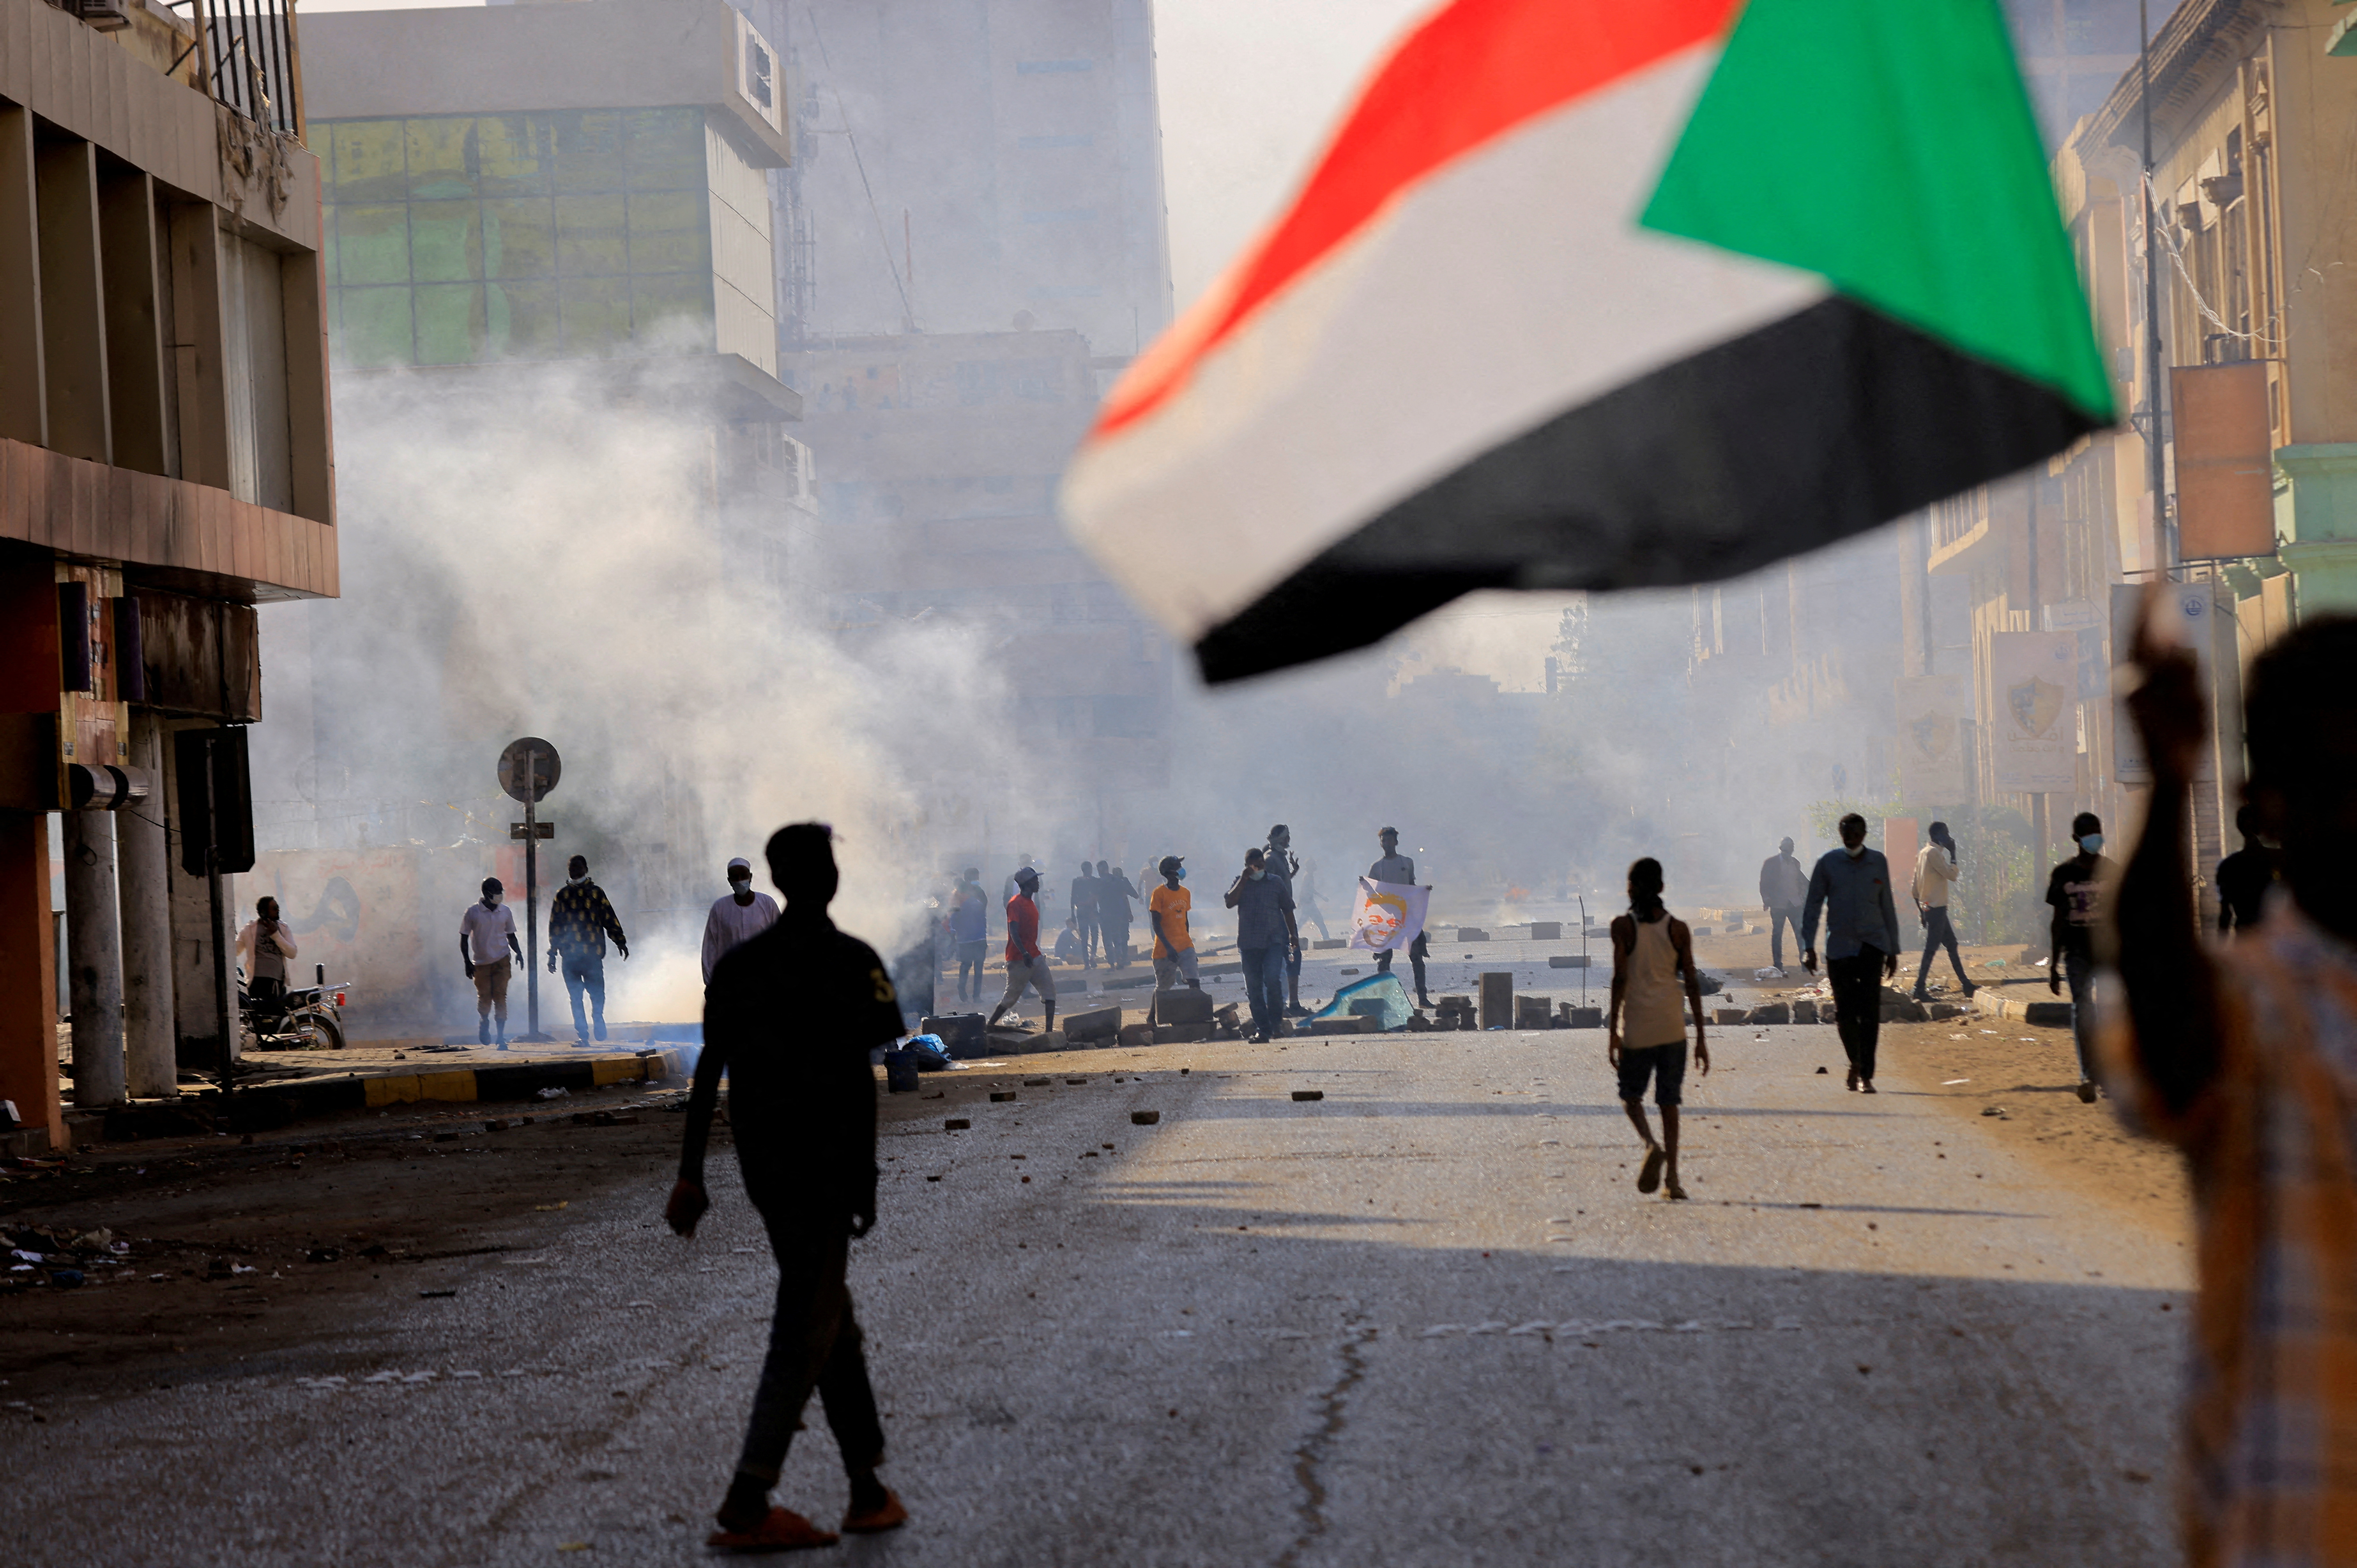 Protesters march to the presidential palace in Khartoum